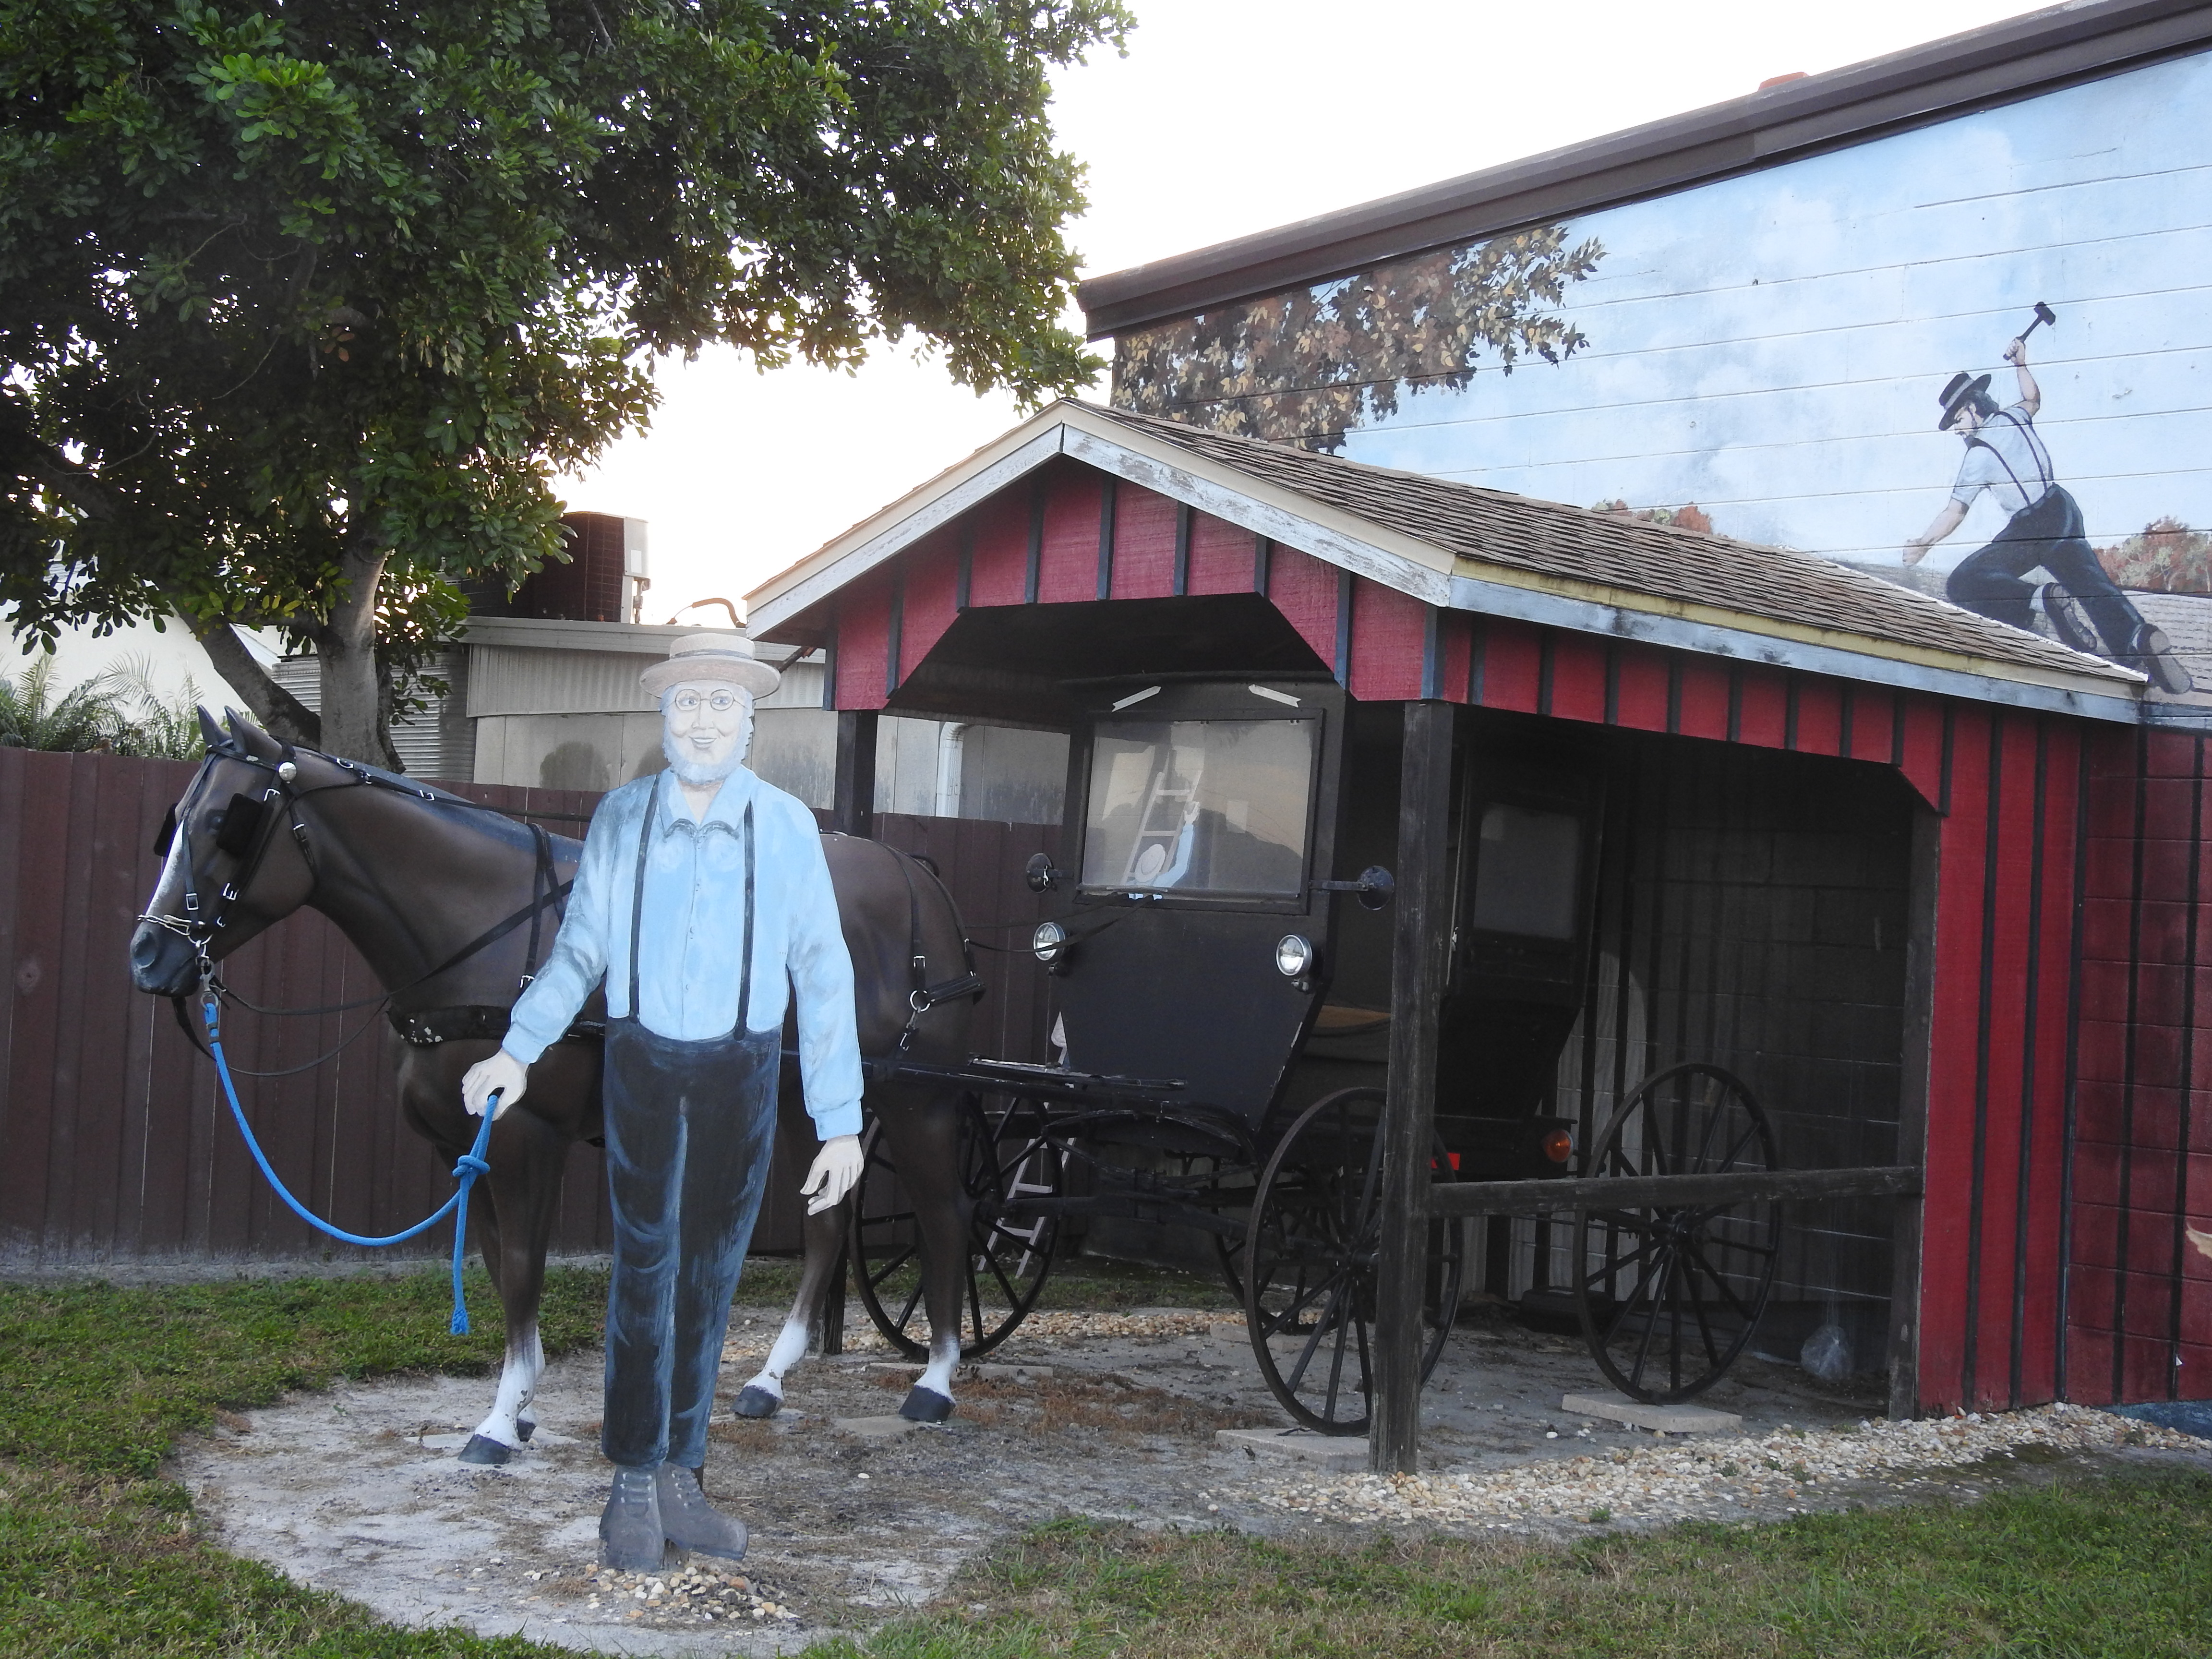 Yoder’s restaurant provides the Amish food experience